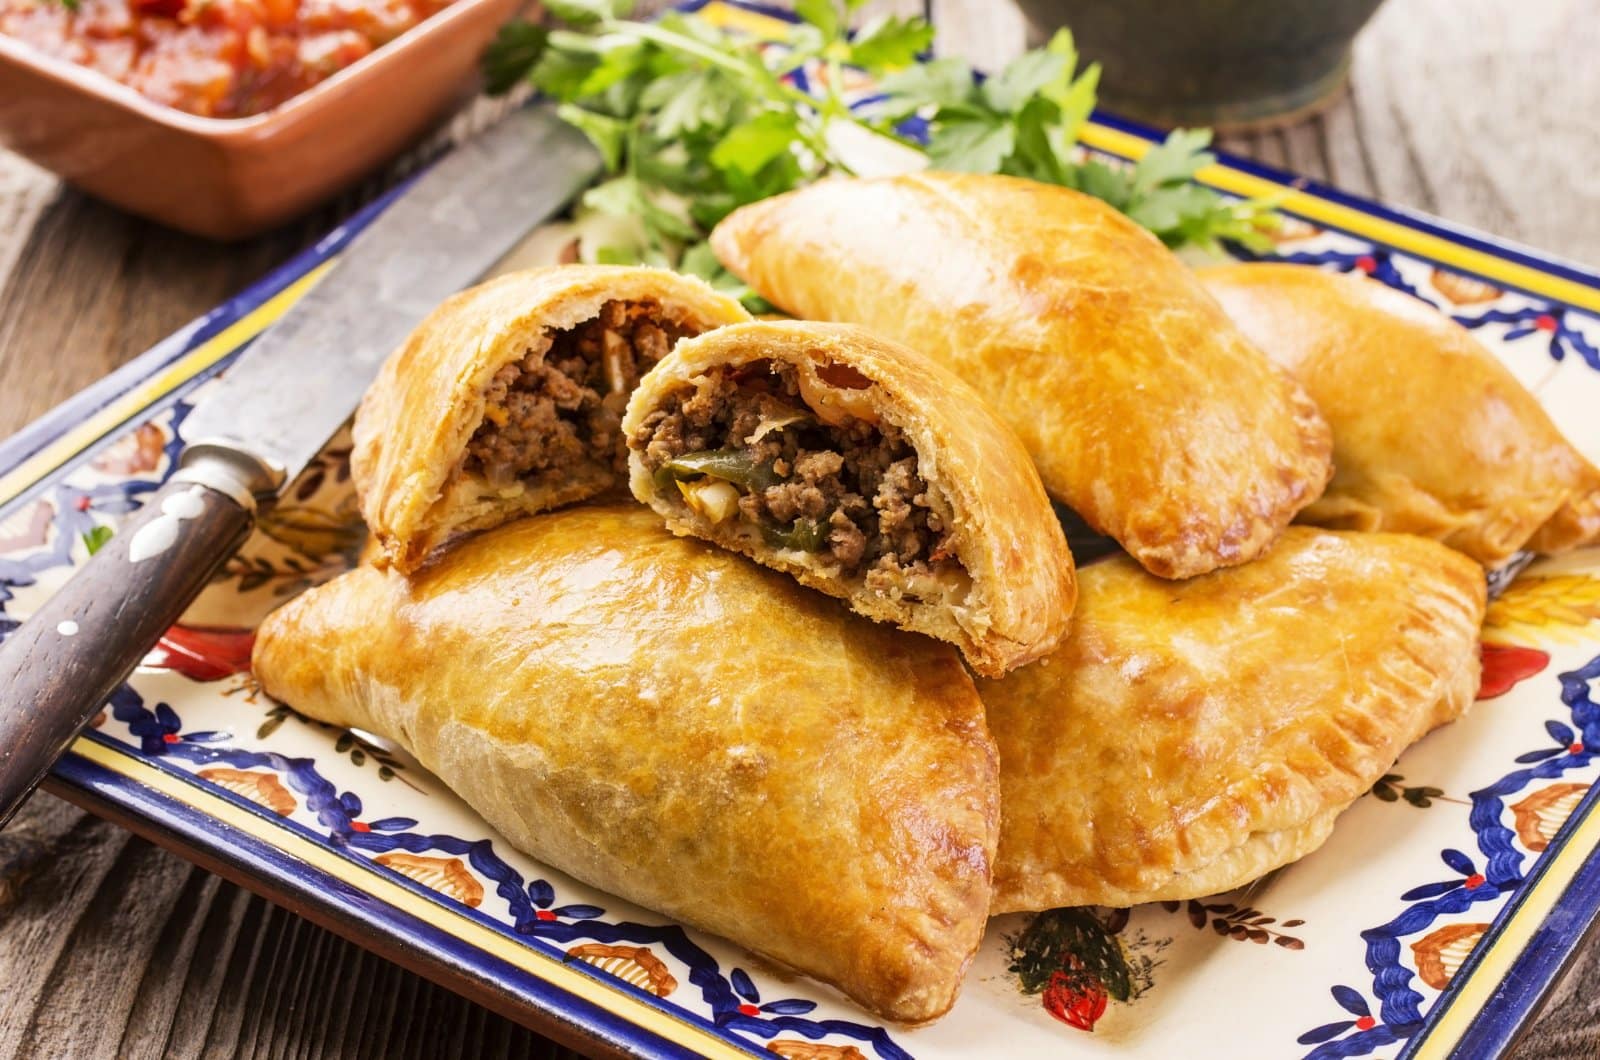 Image Credit: Shutterstock / hlphoto <p><span>These stuffed pastries can be filled with anything from meat to cheese to fruit, making them a versatile snack across Latin America.</span></p>